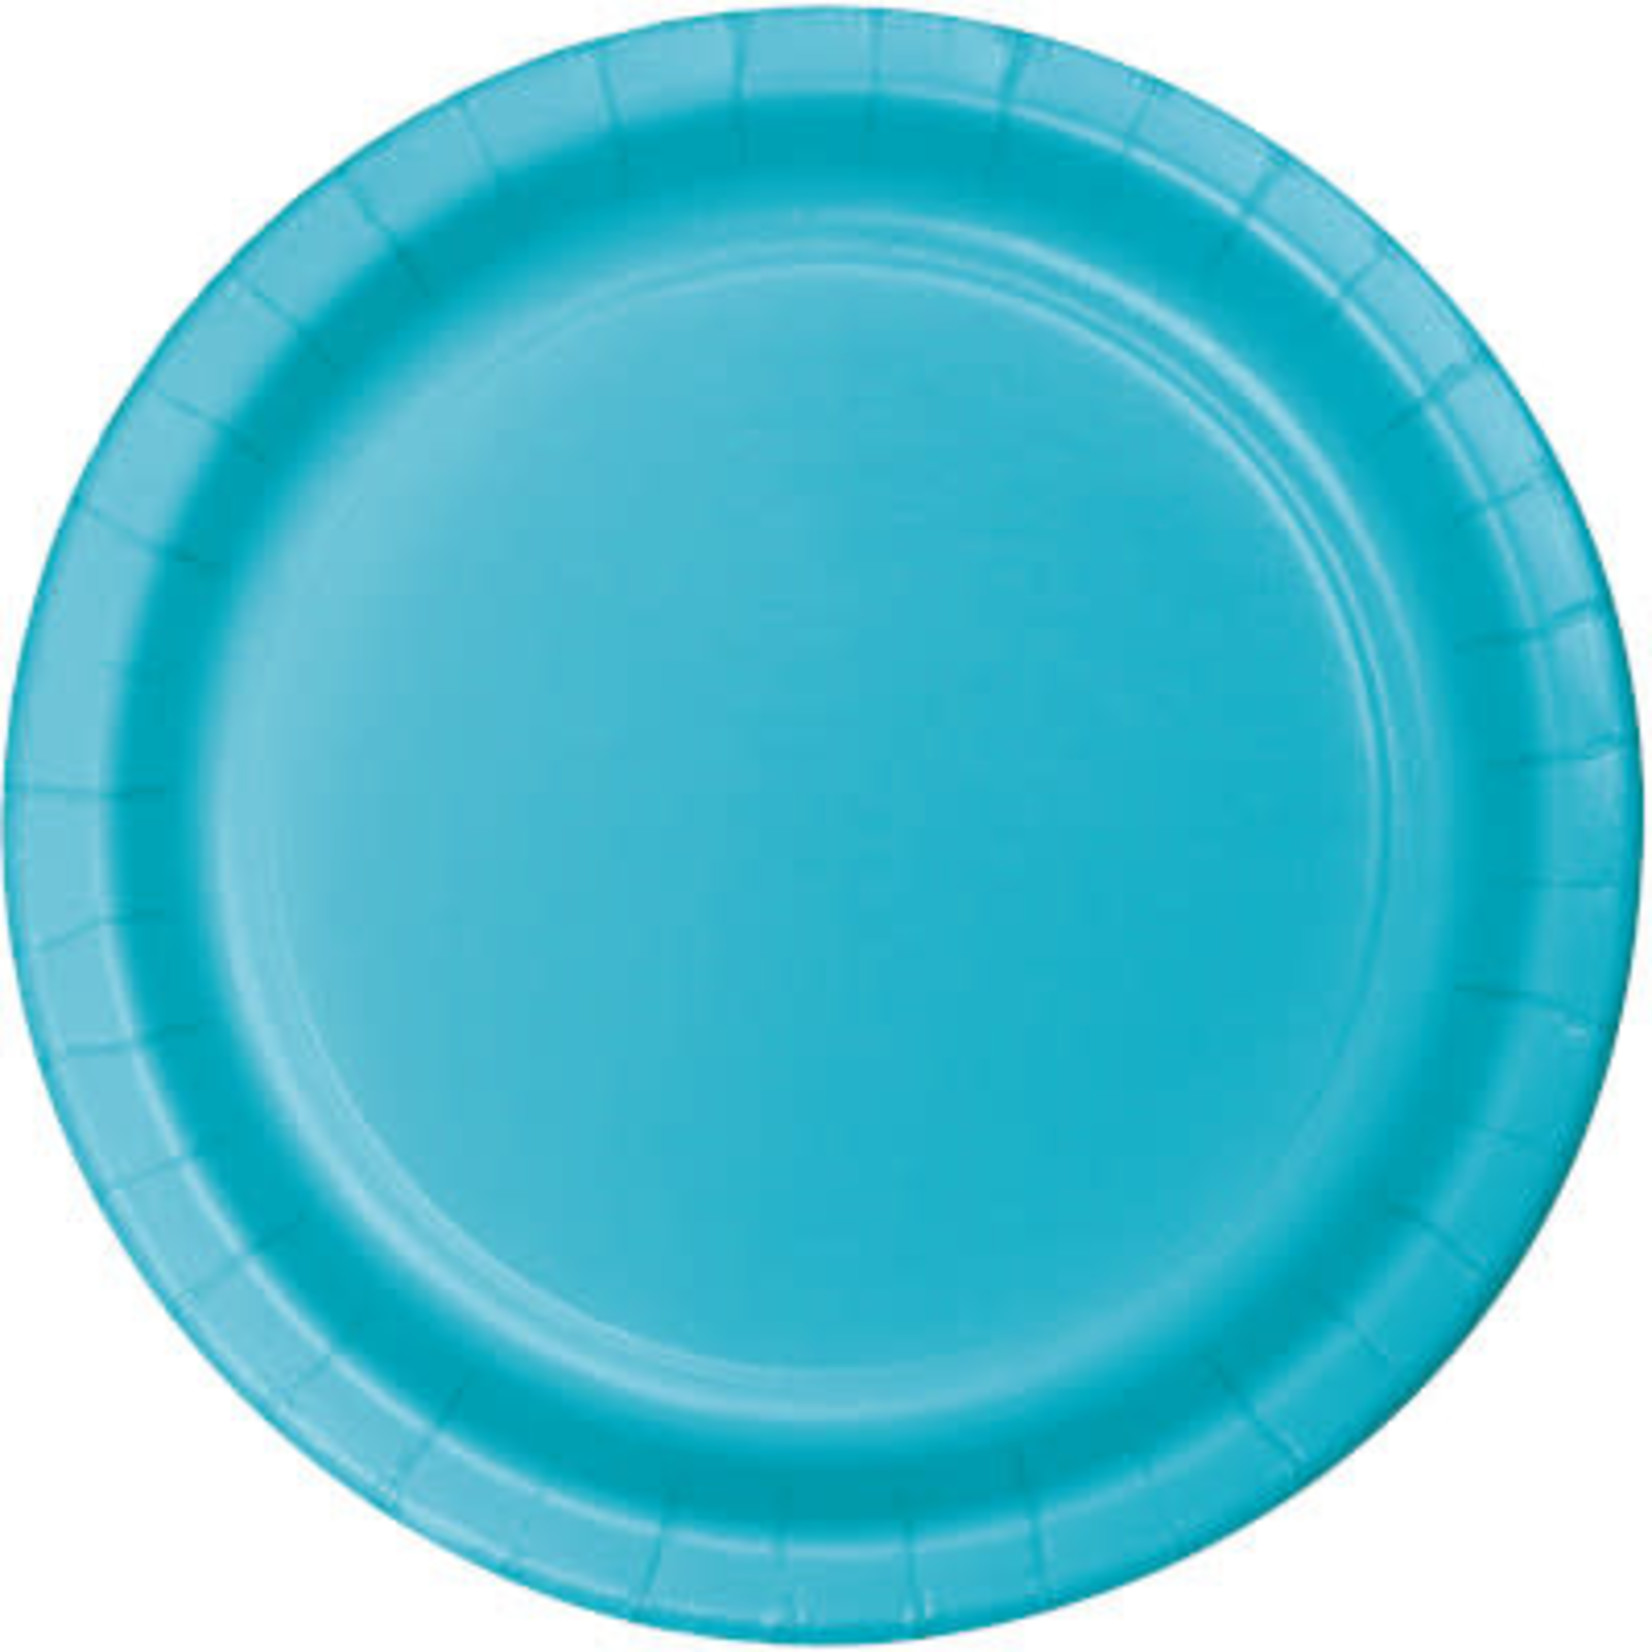 Touch of Color 7" Bermuda Blue Paper Plates - 24ct.